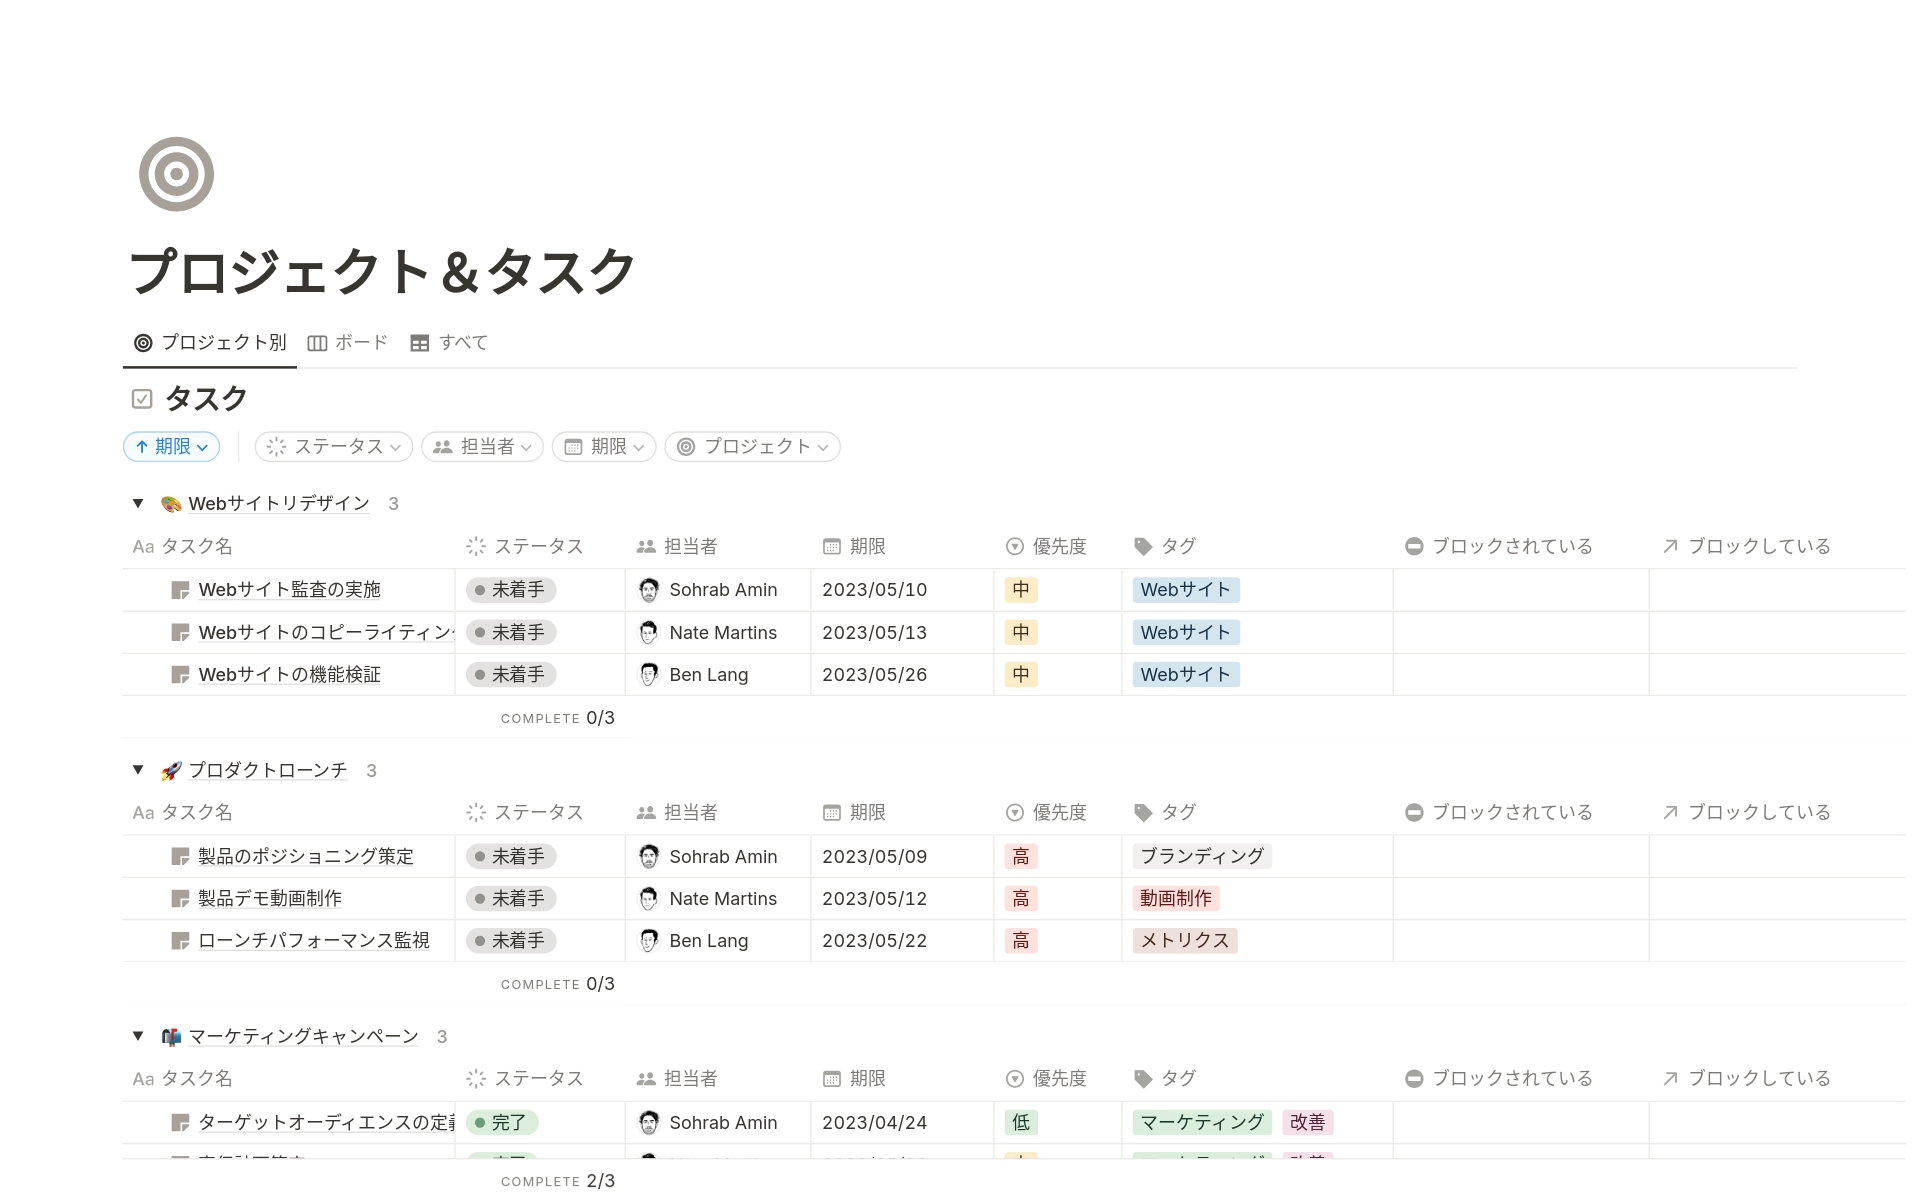 A template preview for Notionプロジェクトを活用するための5つの方法